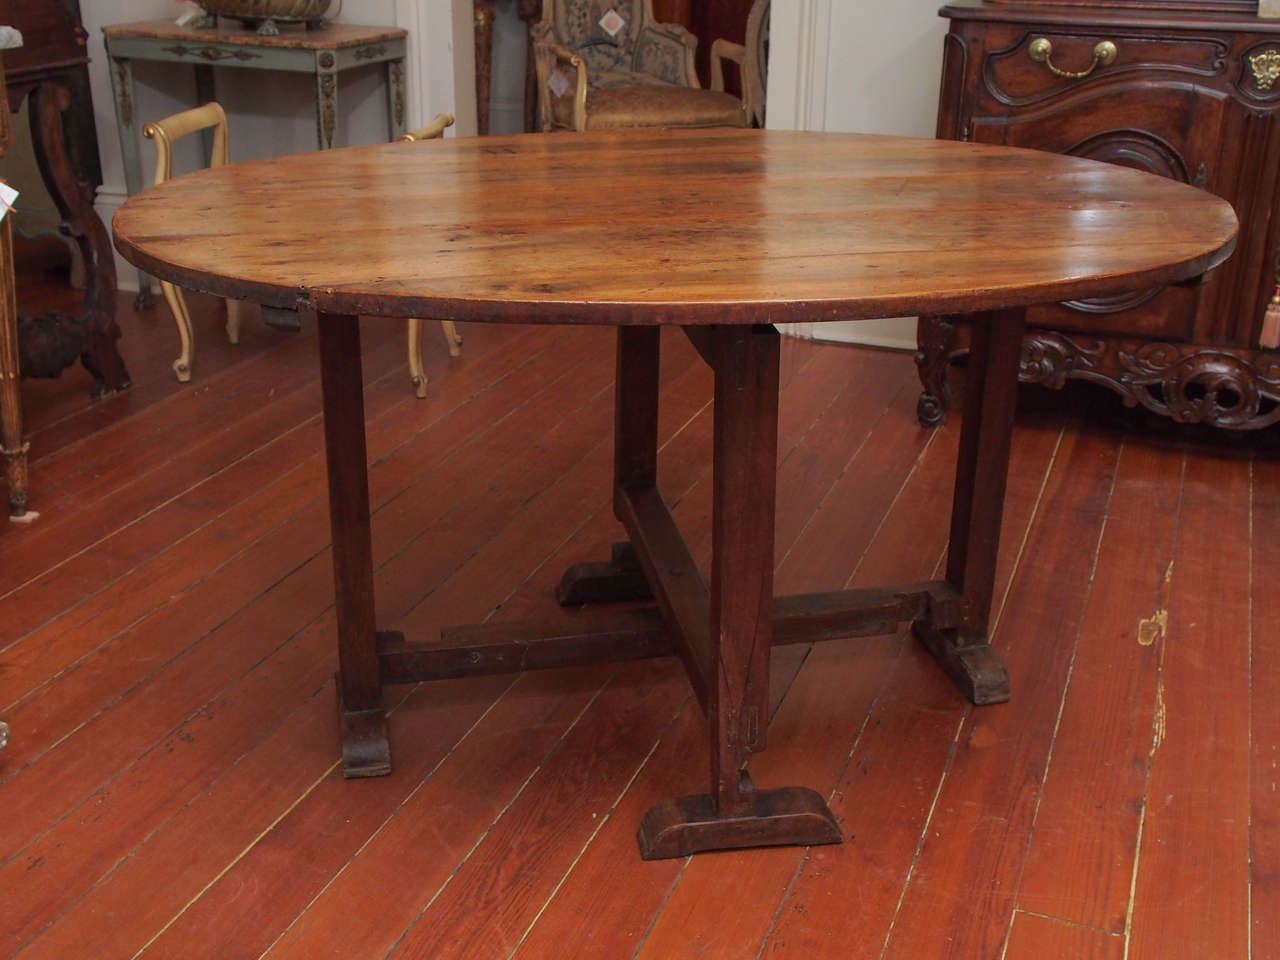 This tilt top table is notable for its commodious size (most tilt top wine tasting tables being much smaller), the oval shape of its top, and its handsome bracket feet.  Constructed of walnut, which has aged to a rich color and vibrant patina.